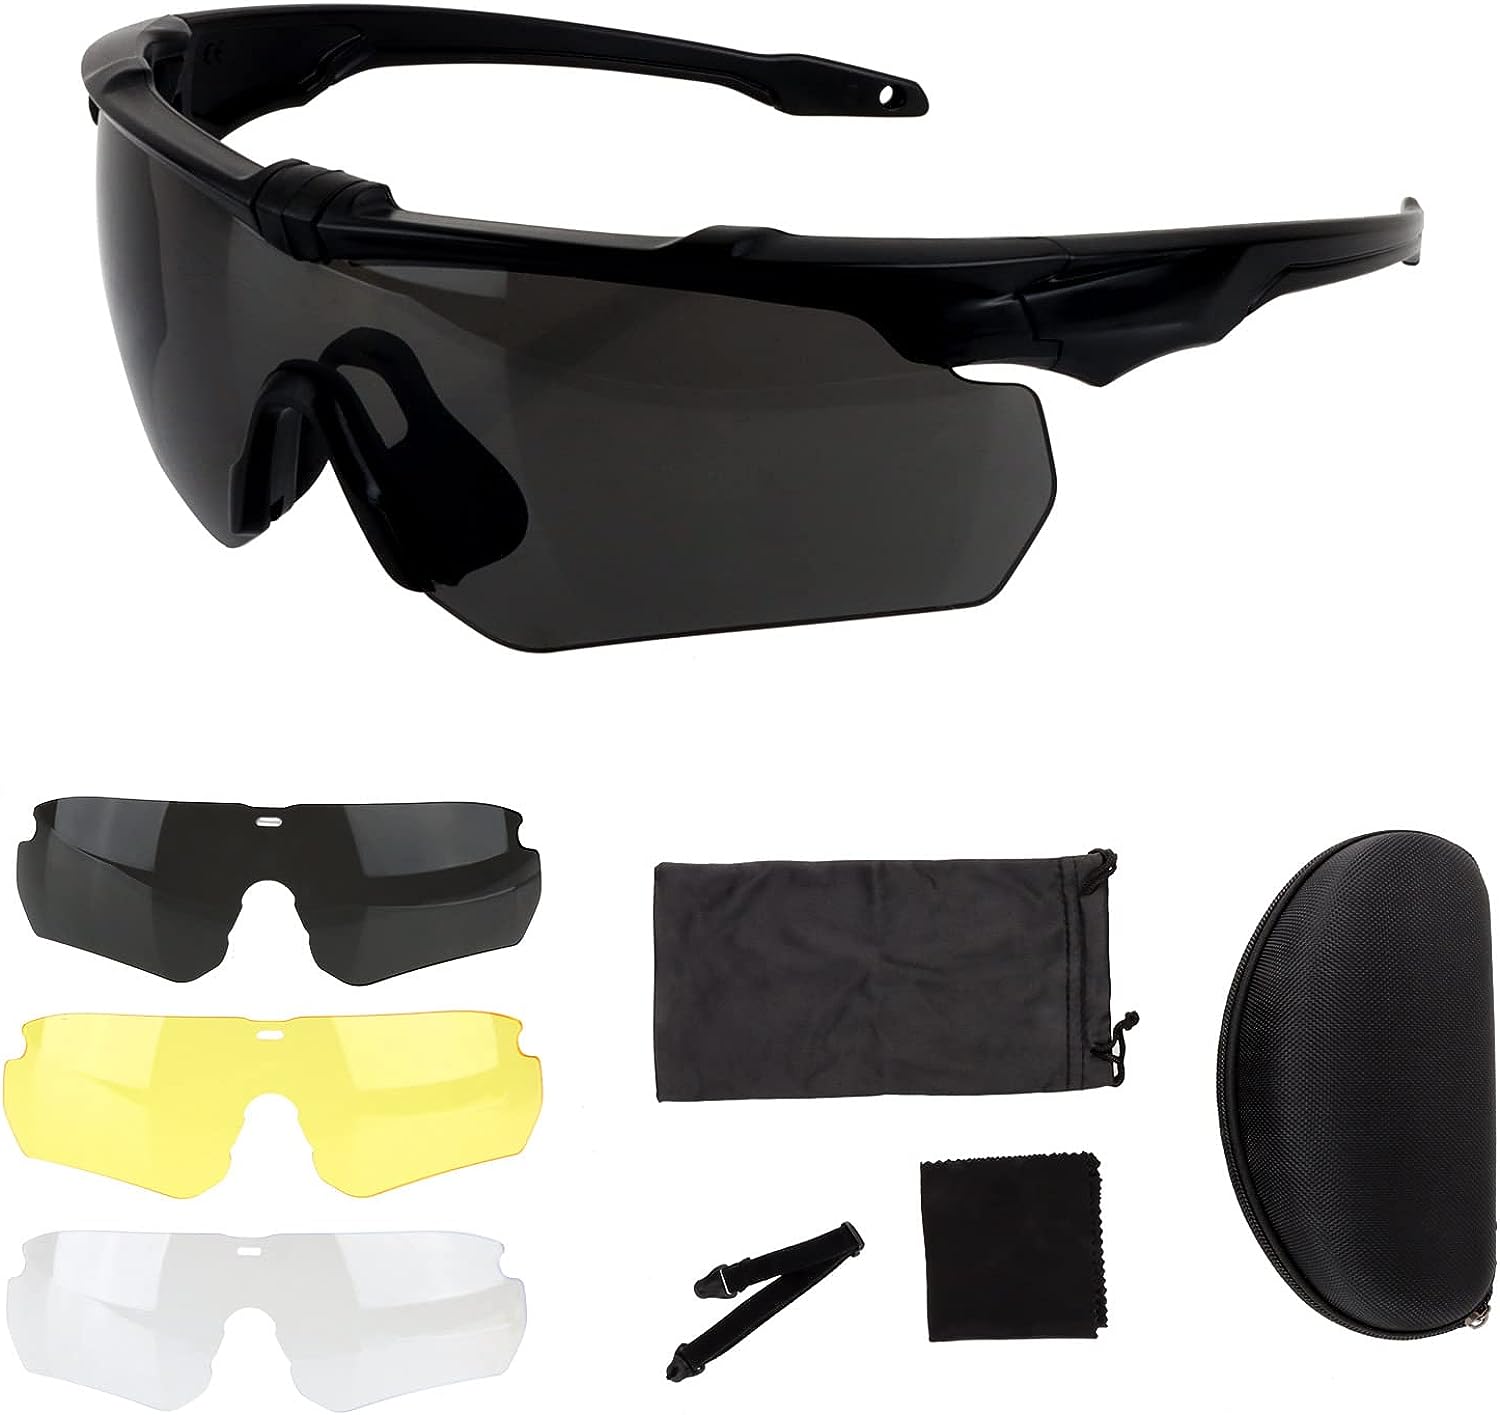 ToopMount Tactical Eyewear Anti Fog, ANSI Z87.1 Shooting Glasses with 3 Interchangeable Lens UV400 Protection Airsoft Goggle